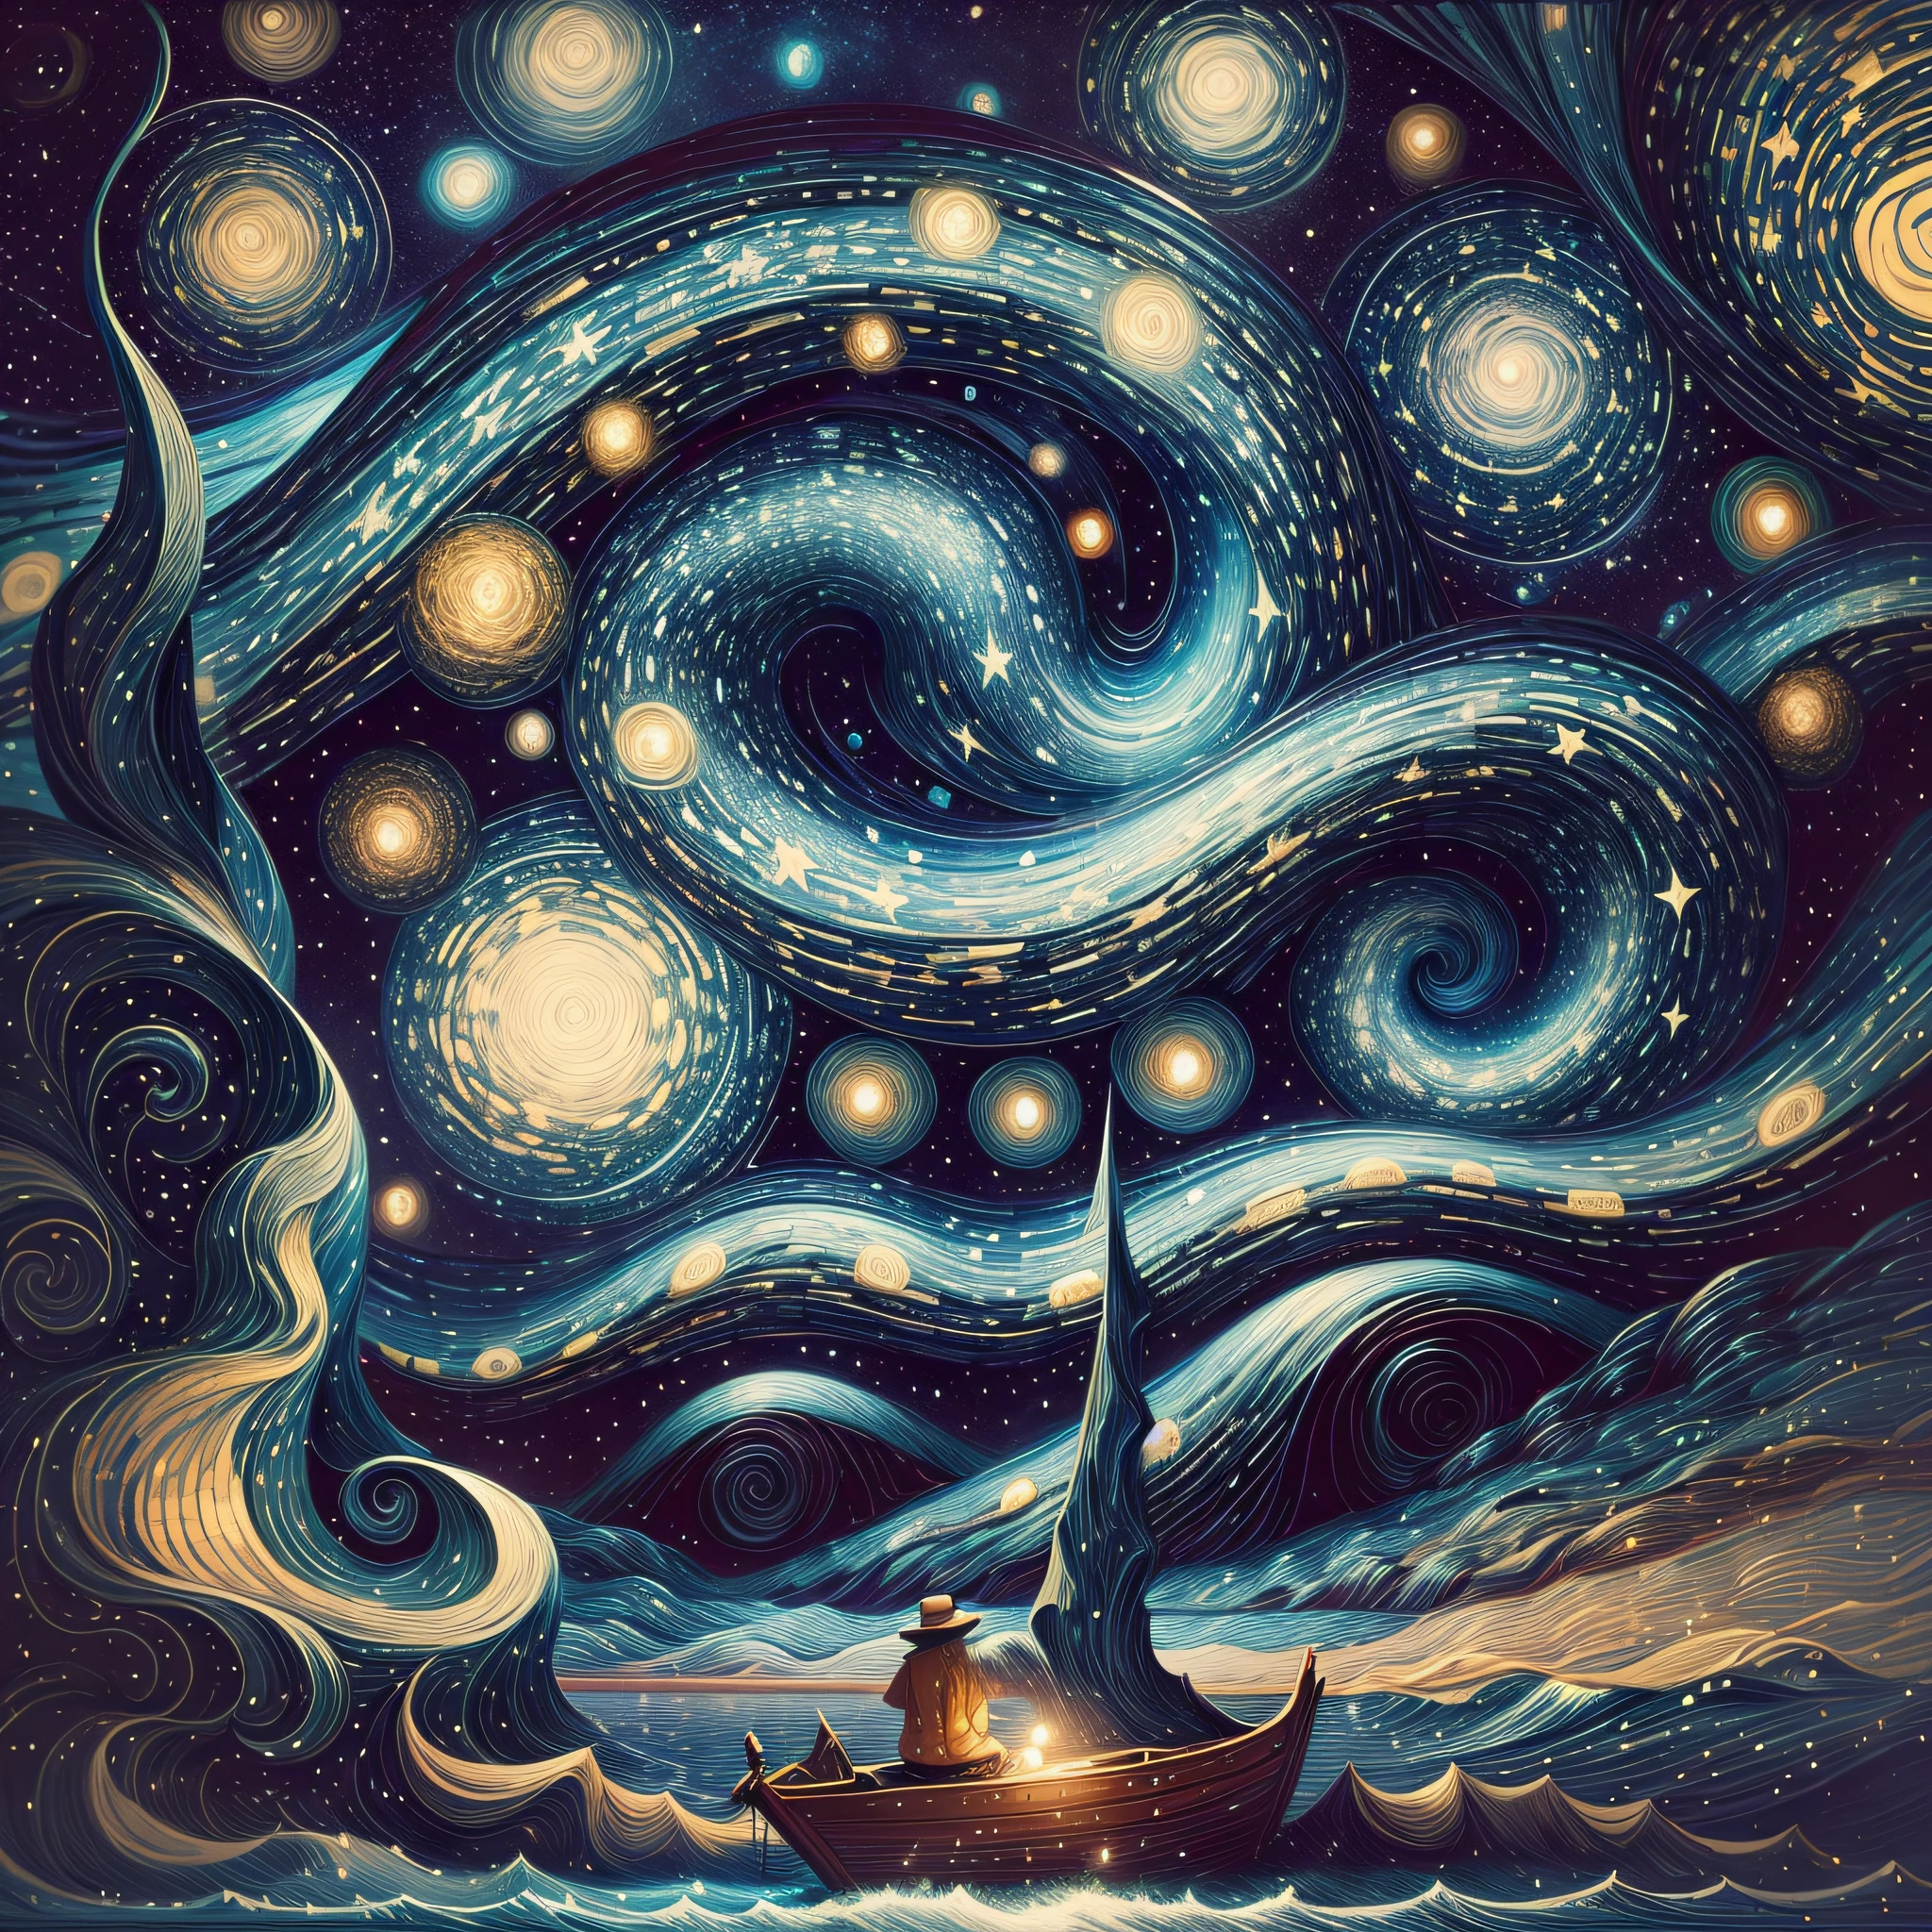 starry night painting of two people in a boat on a lake, james r. eads, van gogh art style, in the starry night, in style of van gogh, style of van gogh, van gogh style, starry night, by Van Gogh, style of van gogh starry night, van gogh painting, anton fadeev and dan mumford, floating among stars --auto --s2